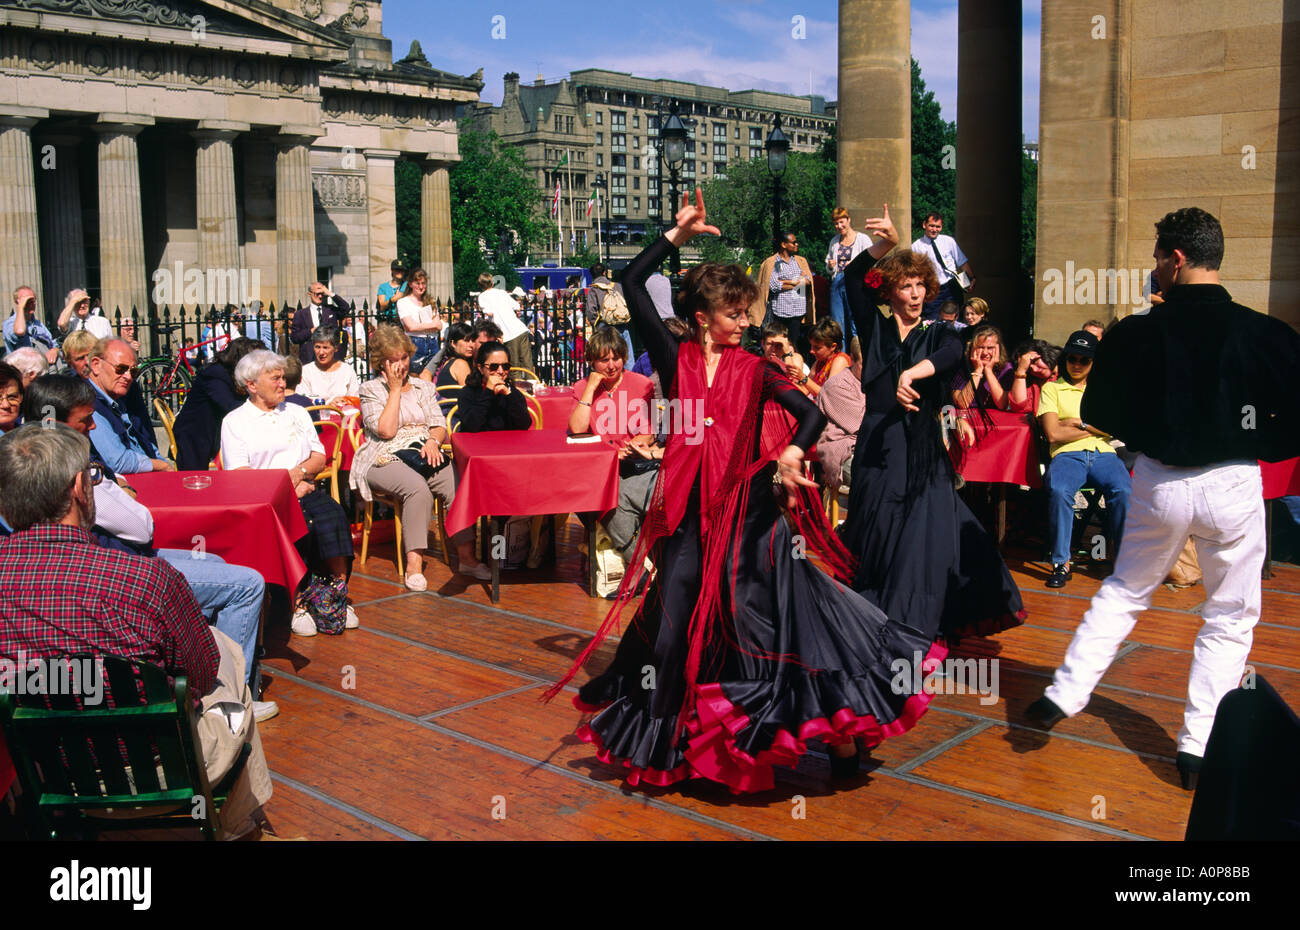 Edinburgh Festival cafe dancing in front of the Royal Scottish Academy in the city centre Princes Street Gardens. Scotland, UK Stock Photo